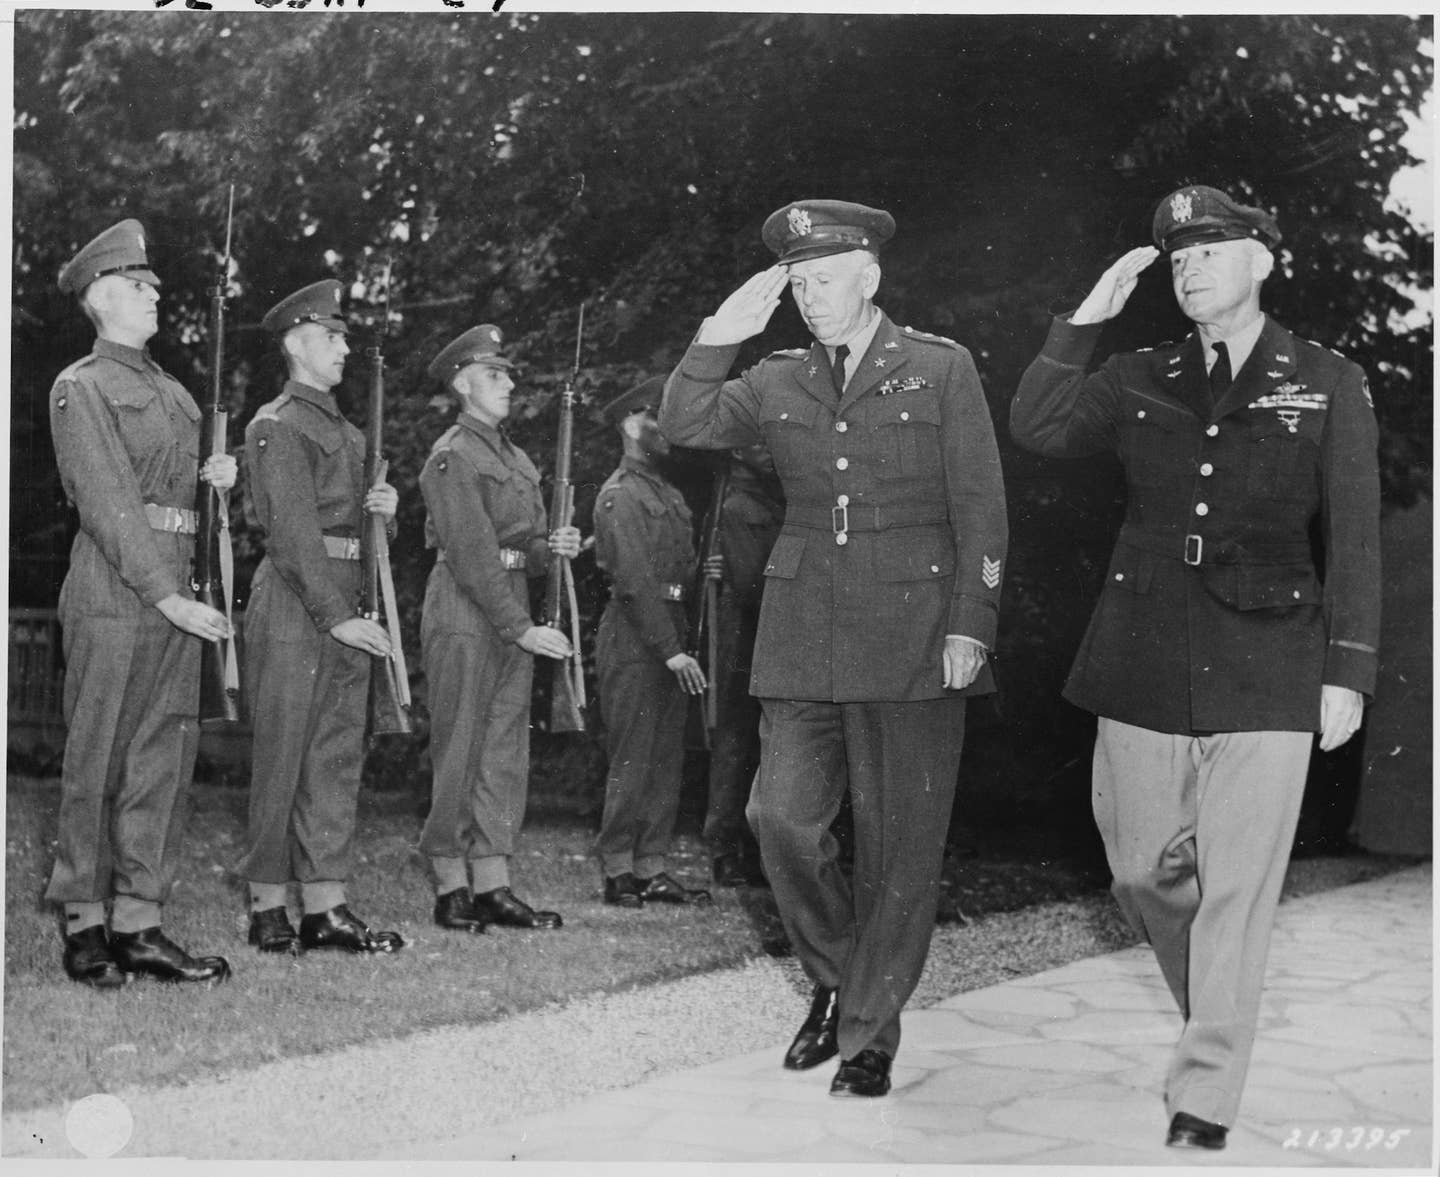 Gen. George C. Marshall (L), U. S. Army Chief of Staff, and Gen. Henry "Hap" Arnold (R), Commanding General, U. S. Army Air Forces, arrive at the residence of Prime Minister Winston Churchill for a dinner given by the British Prime Minister for President Truman and Soviet leader Josef Stalin during the Potsdam Conference, July 23, 1945.&nbsp;<em>Unknown author/Wikimedia Commons.</em>